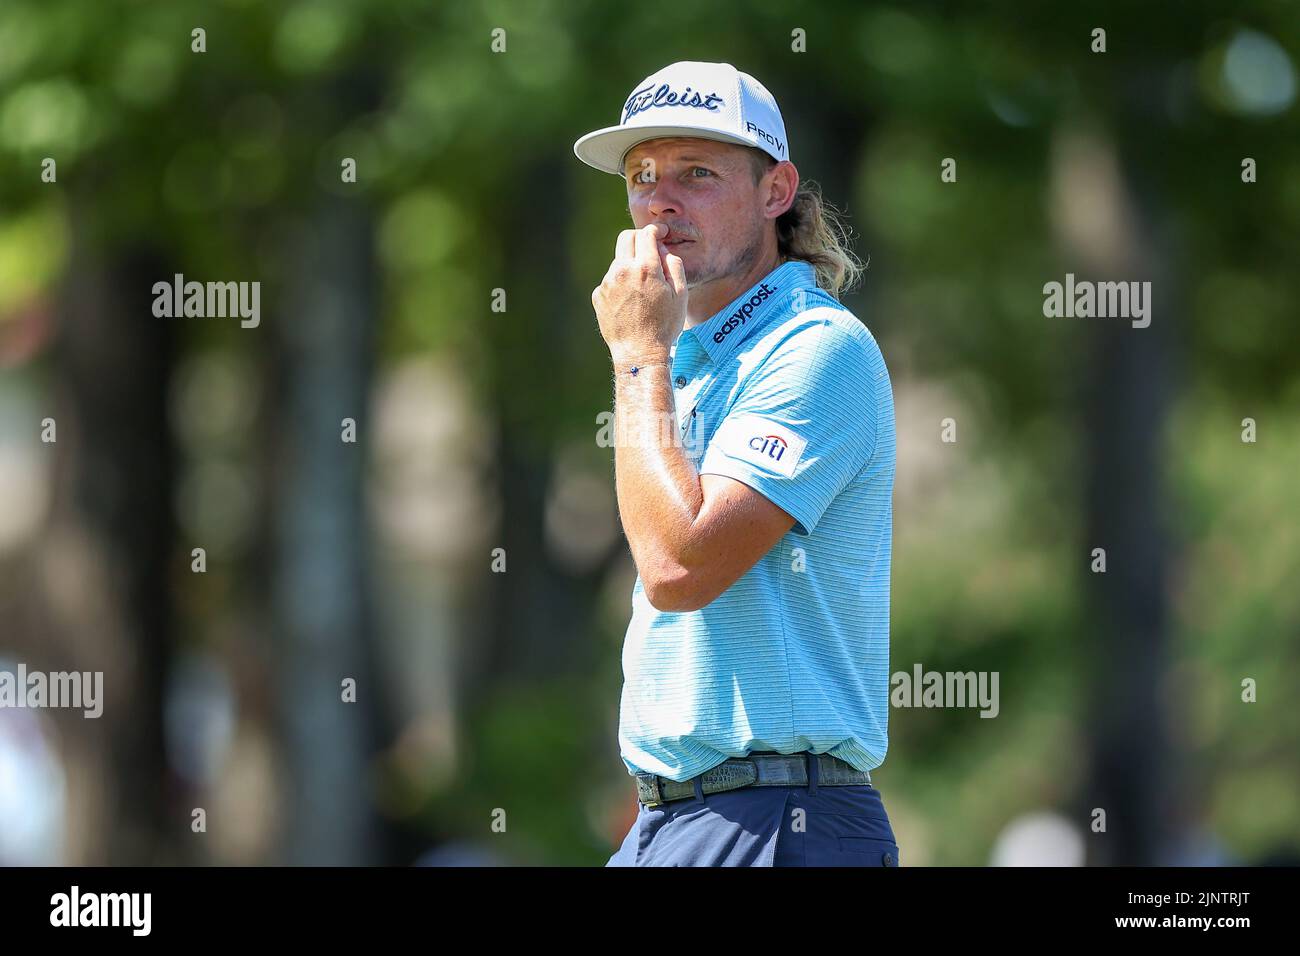 August 13, 2022: Cameron Smith during the third round of the FedEx St. Jude Championship golf tournament at TPC Southwind in Memphis, TN. Gray Siegel/Cal Sport Media Stock Photo